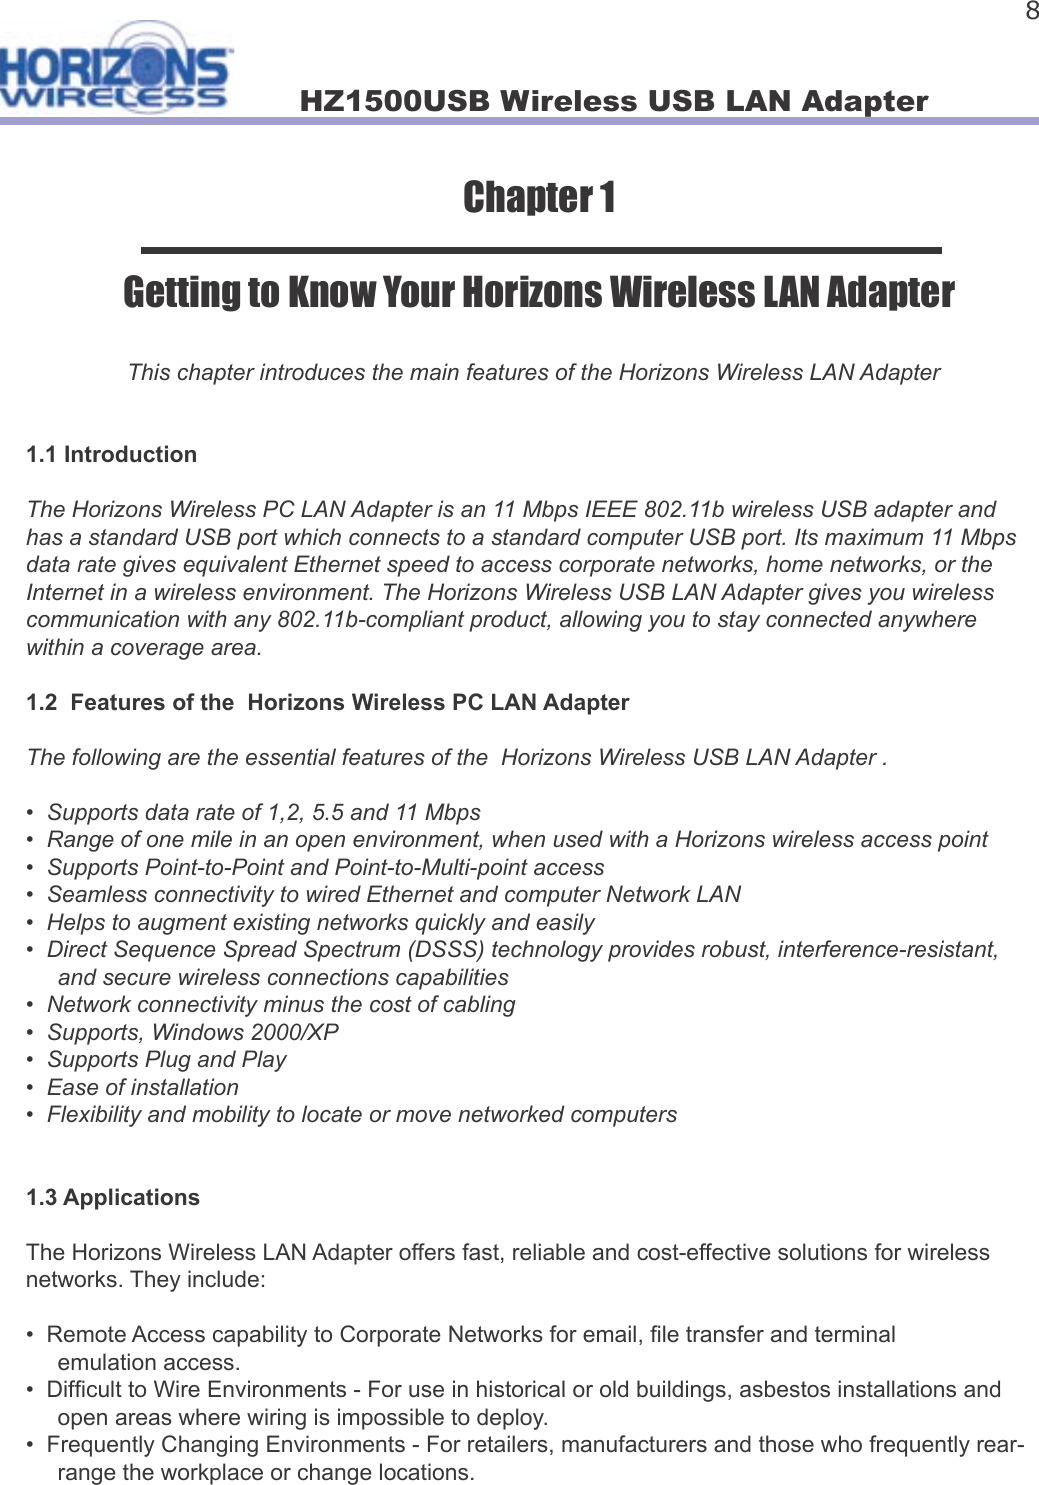 HZ1500USB Wireless USB LAN Adapter 8Chapter 1Getting to Know Your Horizons Wireless LAN AdapterThis chapter introduces the main features of the Horizons Wireless LAN Adapter1.1 IntroductionThe Horizons Wireless PC LAN Adapter is an 11 Mbps IEEE 802.11b wireless USB adapter and has a standard USB port which connects to a standard computer USB port. Its maximum 11 Mbps data rate gives equivalent Ethernet speed to access corporate networks, home networks, or the Internet in a wireless environment. The Horizons Wireless USB LAN Adapter gives you wireless communication with any 802.11b-compliant product, allowing you to stay connected anywhere within a coverage area.1.2  Features of the  Horizons Wireless PC LAN Adapter The following are the essential features of the  Horizons Wireless USB LAN Adapter .•  Supports data rate of 1,2, 5.5 and 11 Mbps•  Range of one mile in an open environment, when used with a Horizons wireless access point•  Supports Point-to-Point and Point-to-Multi-point access•  Seamless connectivity to wired Ethernet and computer Network LAN•  Helps to augment existing networks quickly and easily•  Direct Sequence Spread Spectrum (DSSS) technology provides robust, interference-resistant,      and secure wireless connections capabilities•  Network connectivity minus the cost of cabling•  Supports, Windows 2000/XP•  Supports Plug and Play•  Ease of installation•  Flexibility and mobility to locate or move networked computers1.3 ApplicationsThe Horizons Wireless LAN Adapter offers fast, reliable and cost-effective solutions for wireless networks. They include:•  Remote Access capability to Corporate Networks for email,  le transfer and terminal      emulation access.•  Dif cult to Wire Environments - For use in historical or old buildings, asbestos installations and      open areas where wiring is impossible to deploy.•  Frequently Changing Environments - For retailers, manufacturers and those who frequently rear-     range the workplace or change locations.